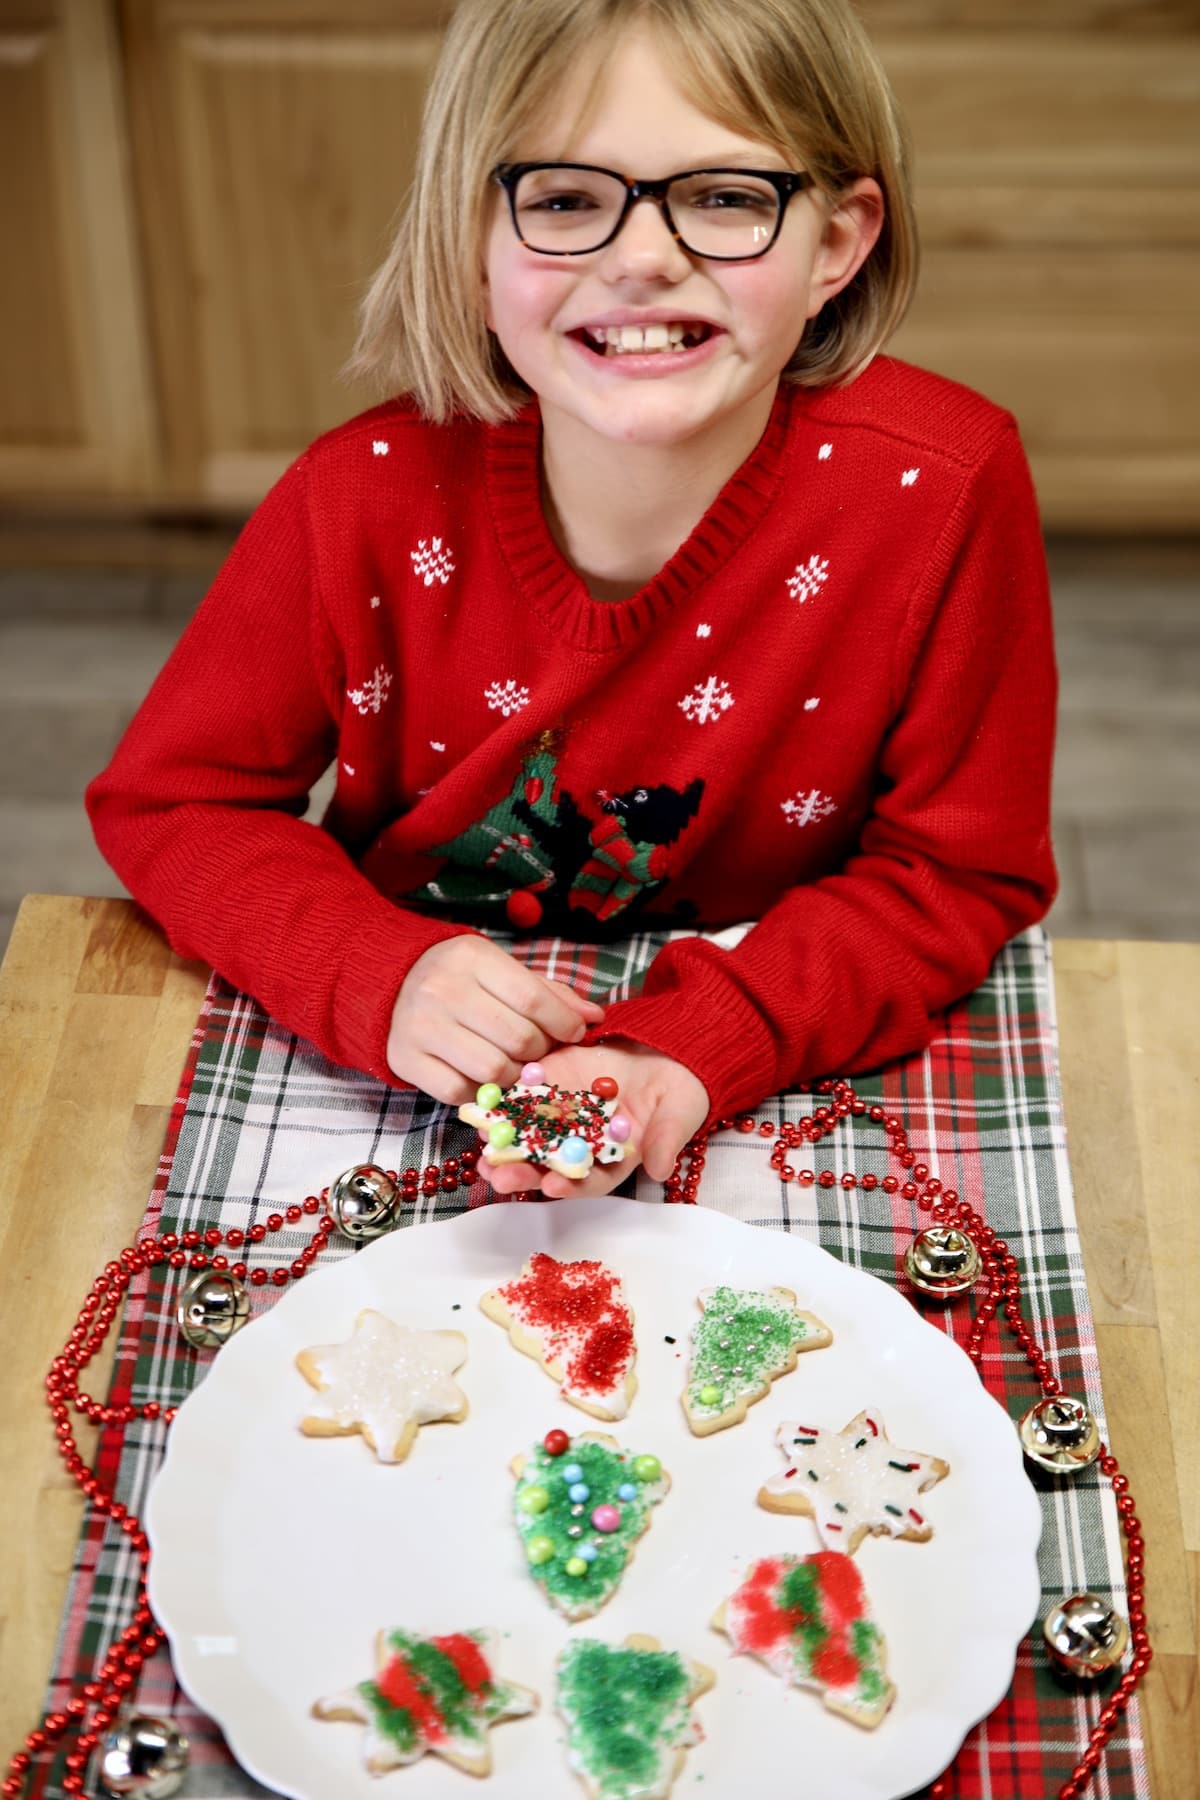 Girl with decorated sugar cookies on a tray.